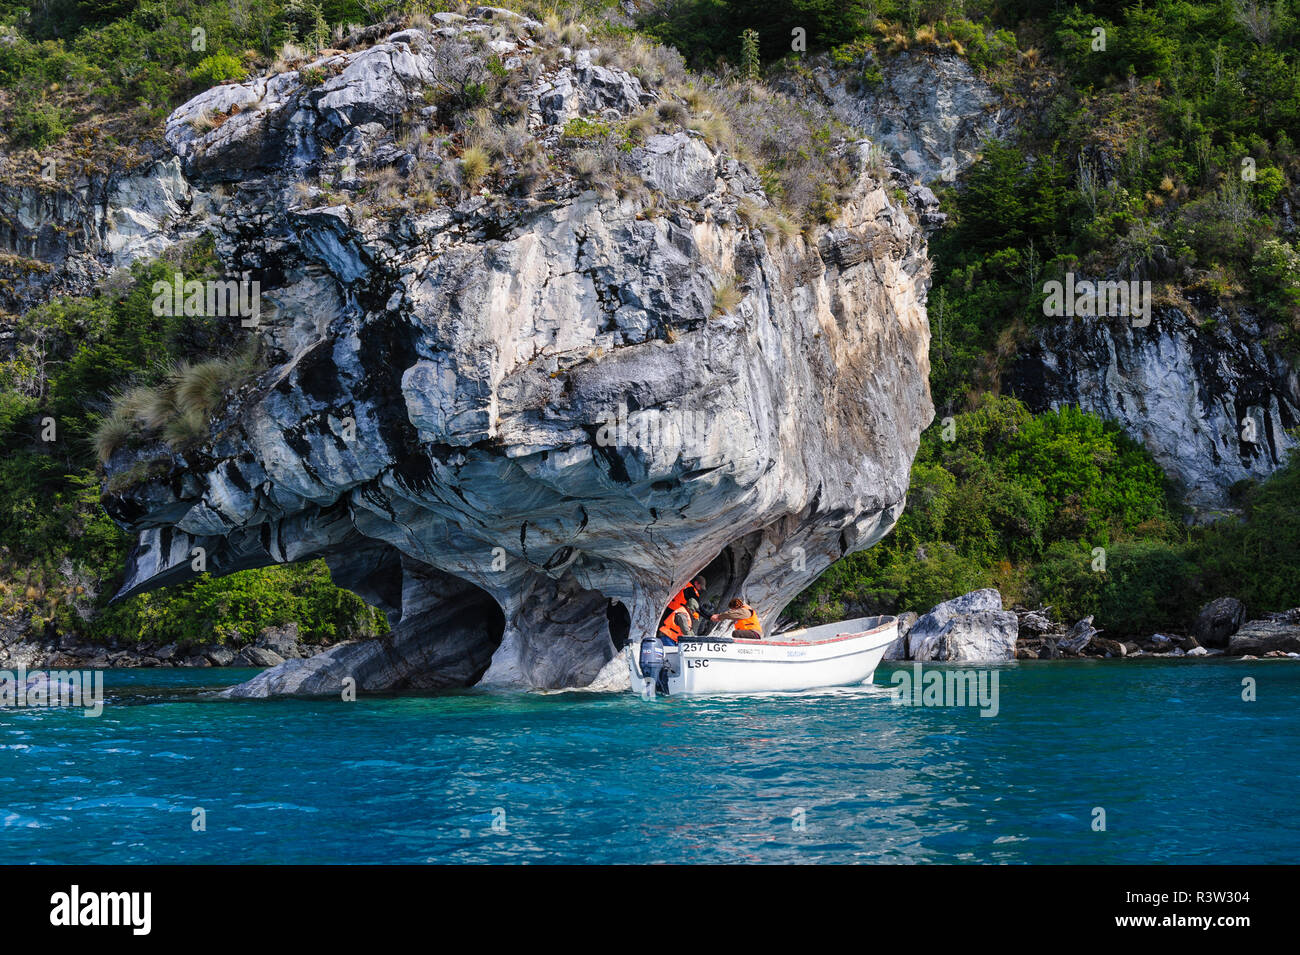 Chile, Aysen, Puerto Rio Tranquilo, Marble Chapel Natural Sanctuary. Tour boat exploring the limestone formations. Stock Photo